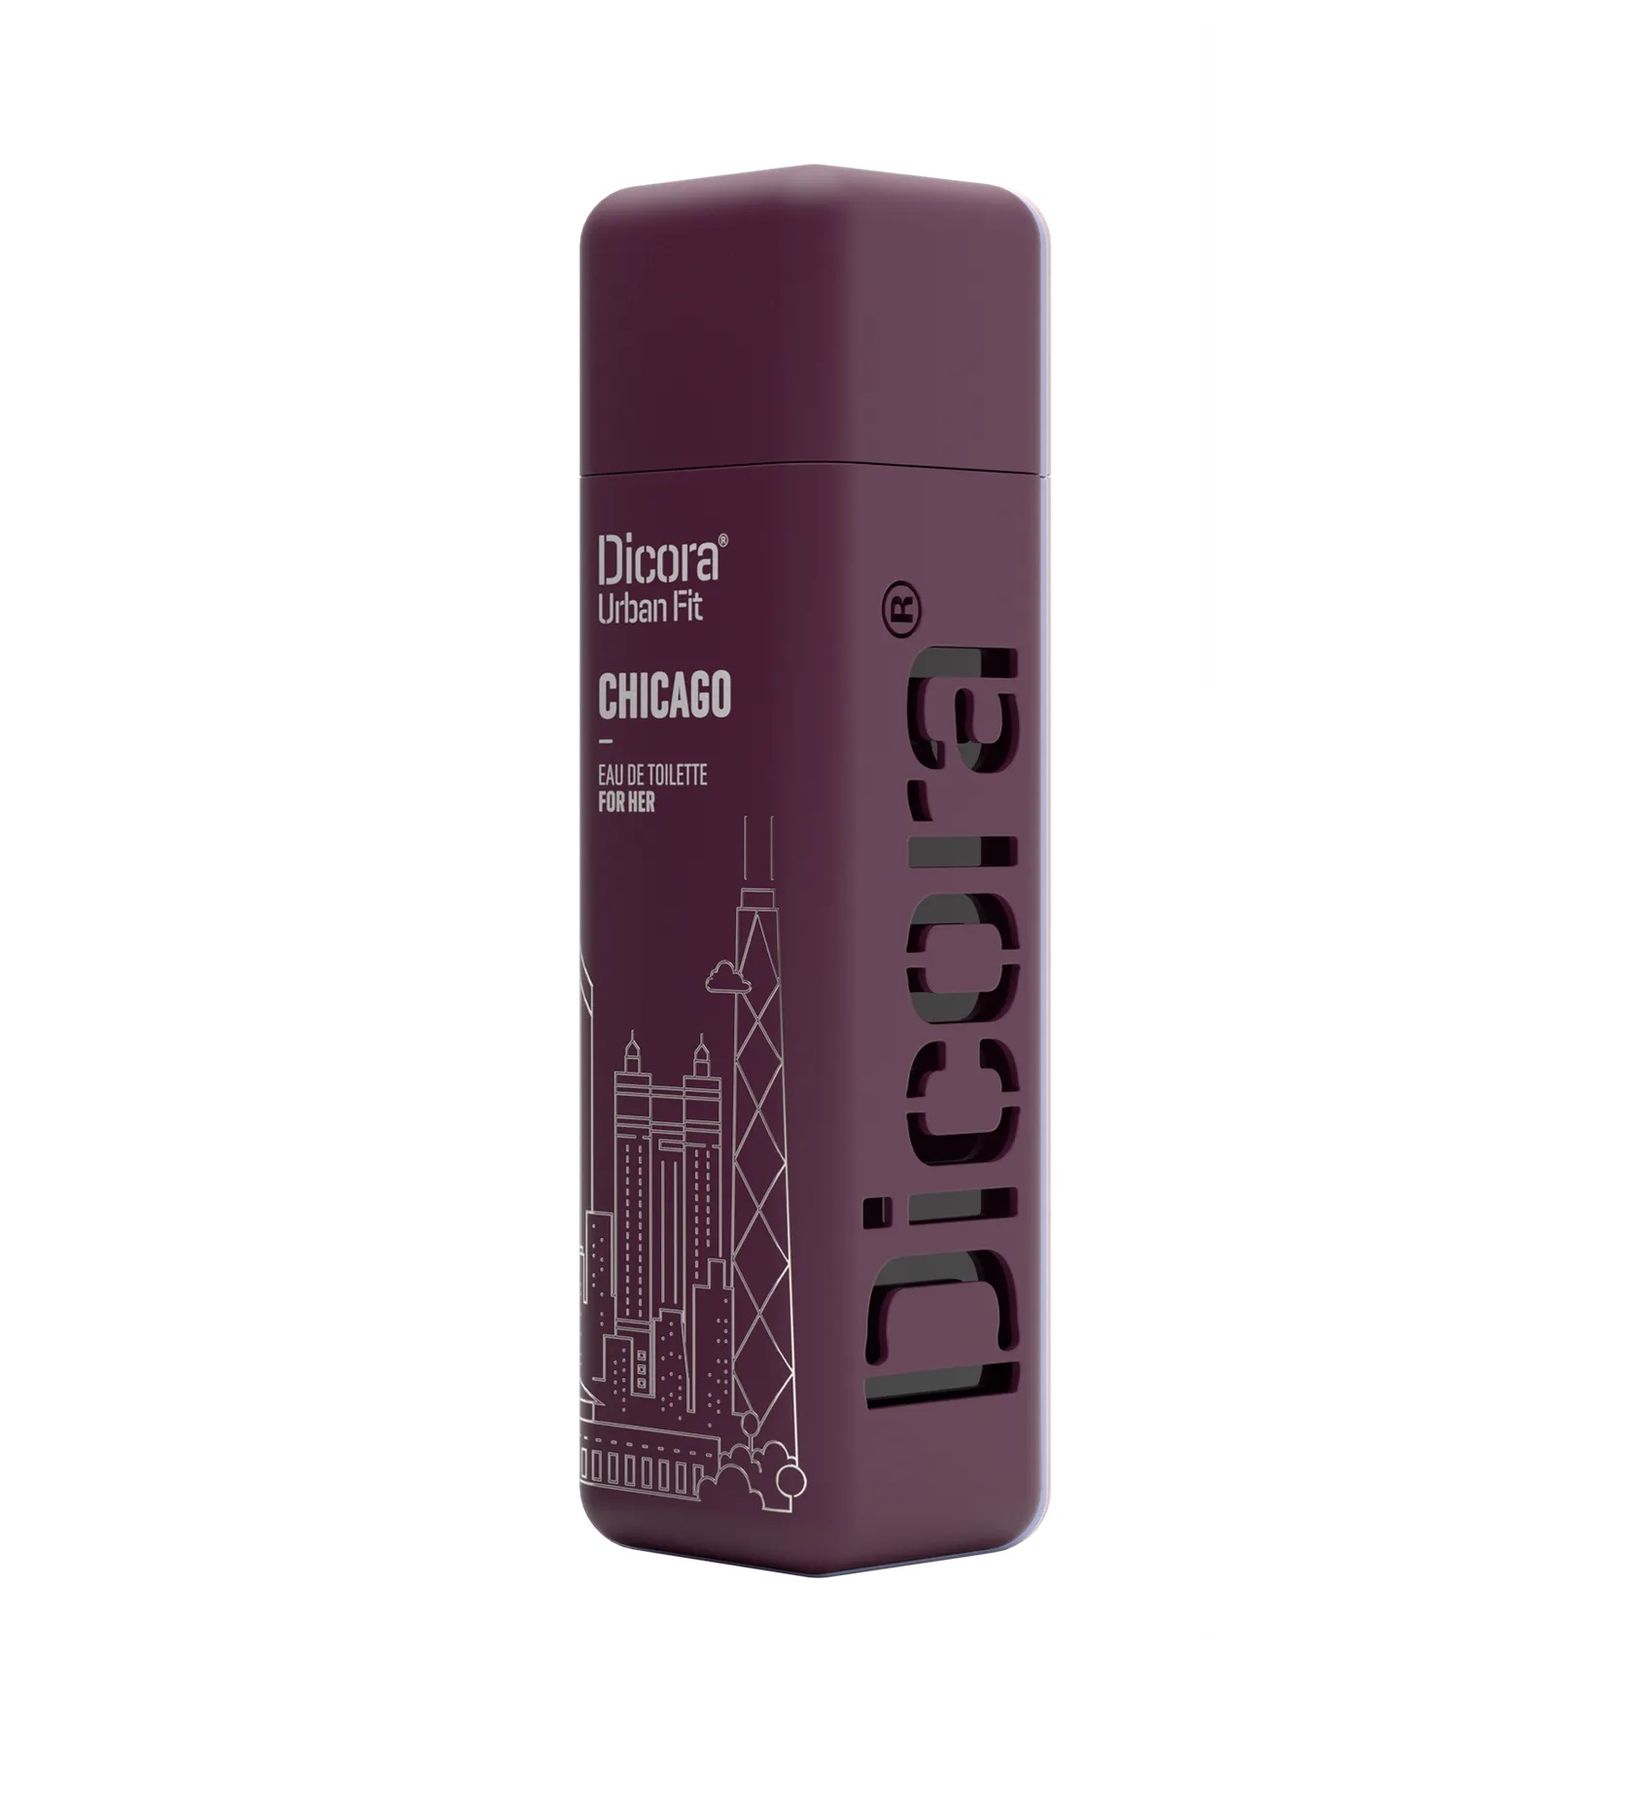 Buy for €9 Toilet water Chicago Dicora 30 ml with delivery in Ukraine and  international shipping